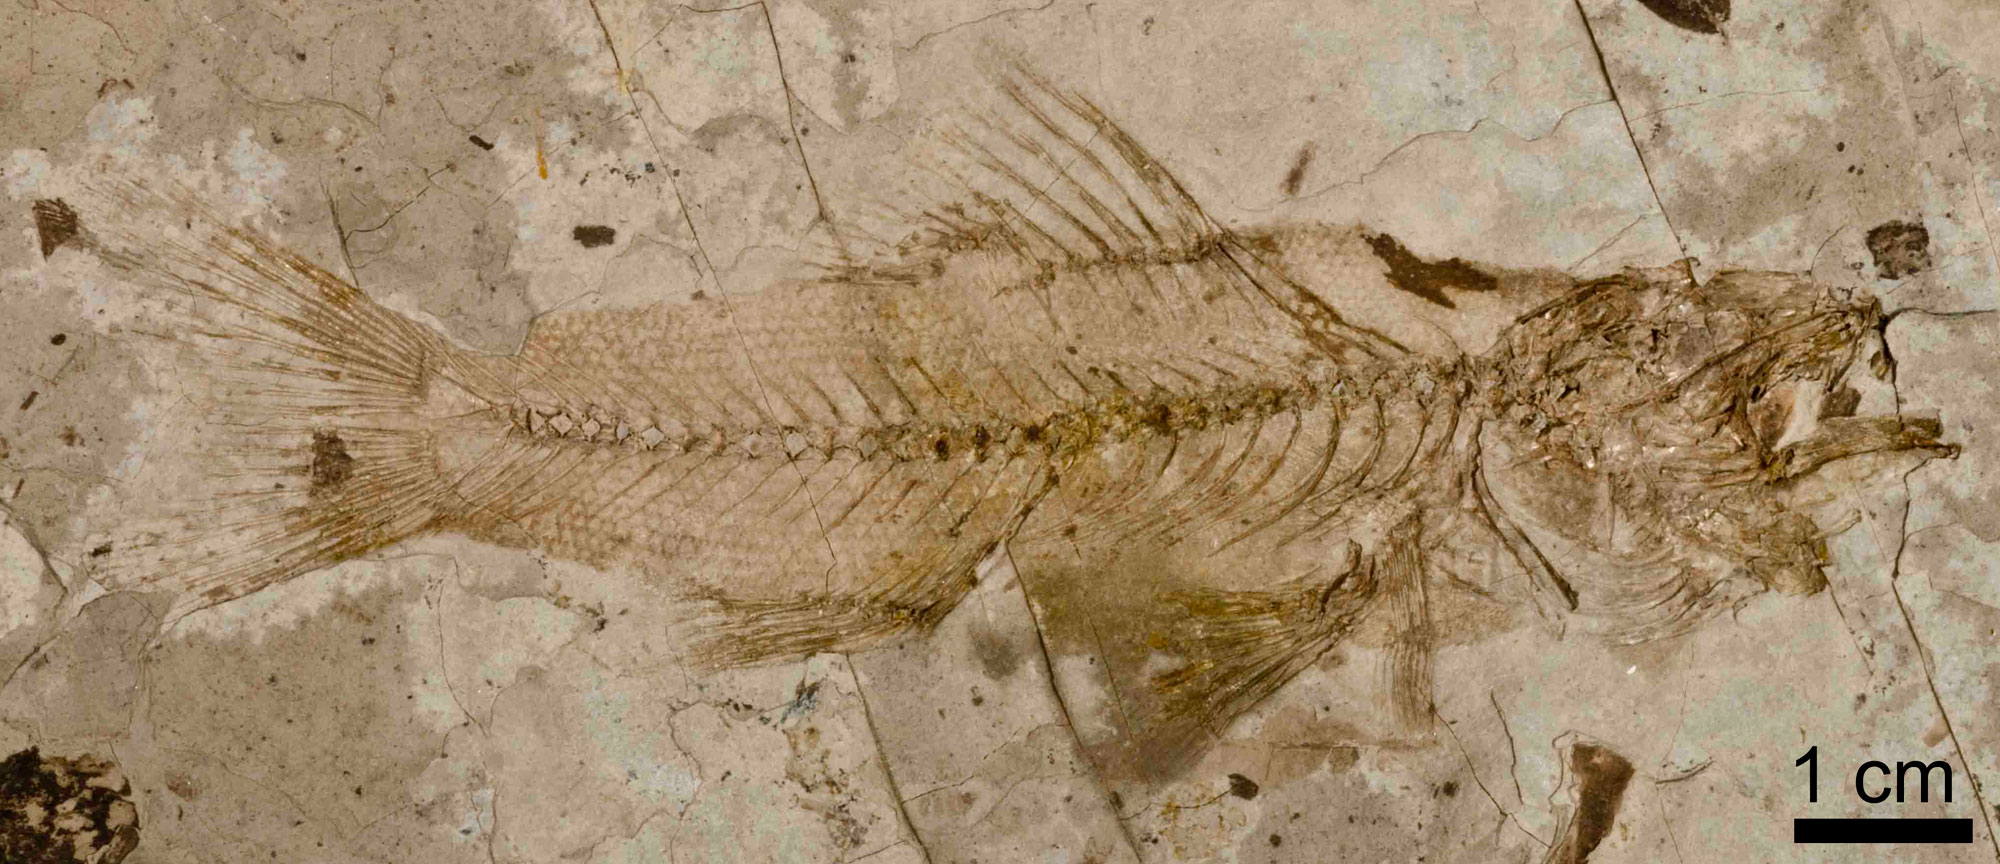 Photo of a fossil pirate perch (a type of fish) from the Eocene Florissant Fossil Beds, Colorado. The fish is shown in lateral (side) view and the skeleton is relatively complete. Scales can be seen on the body.